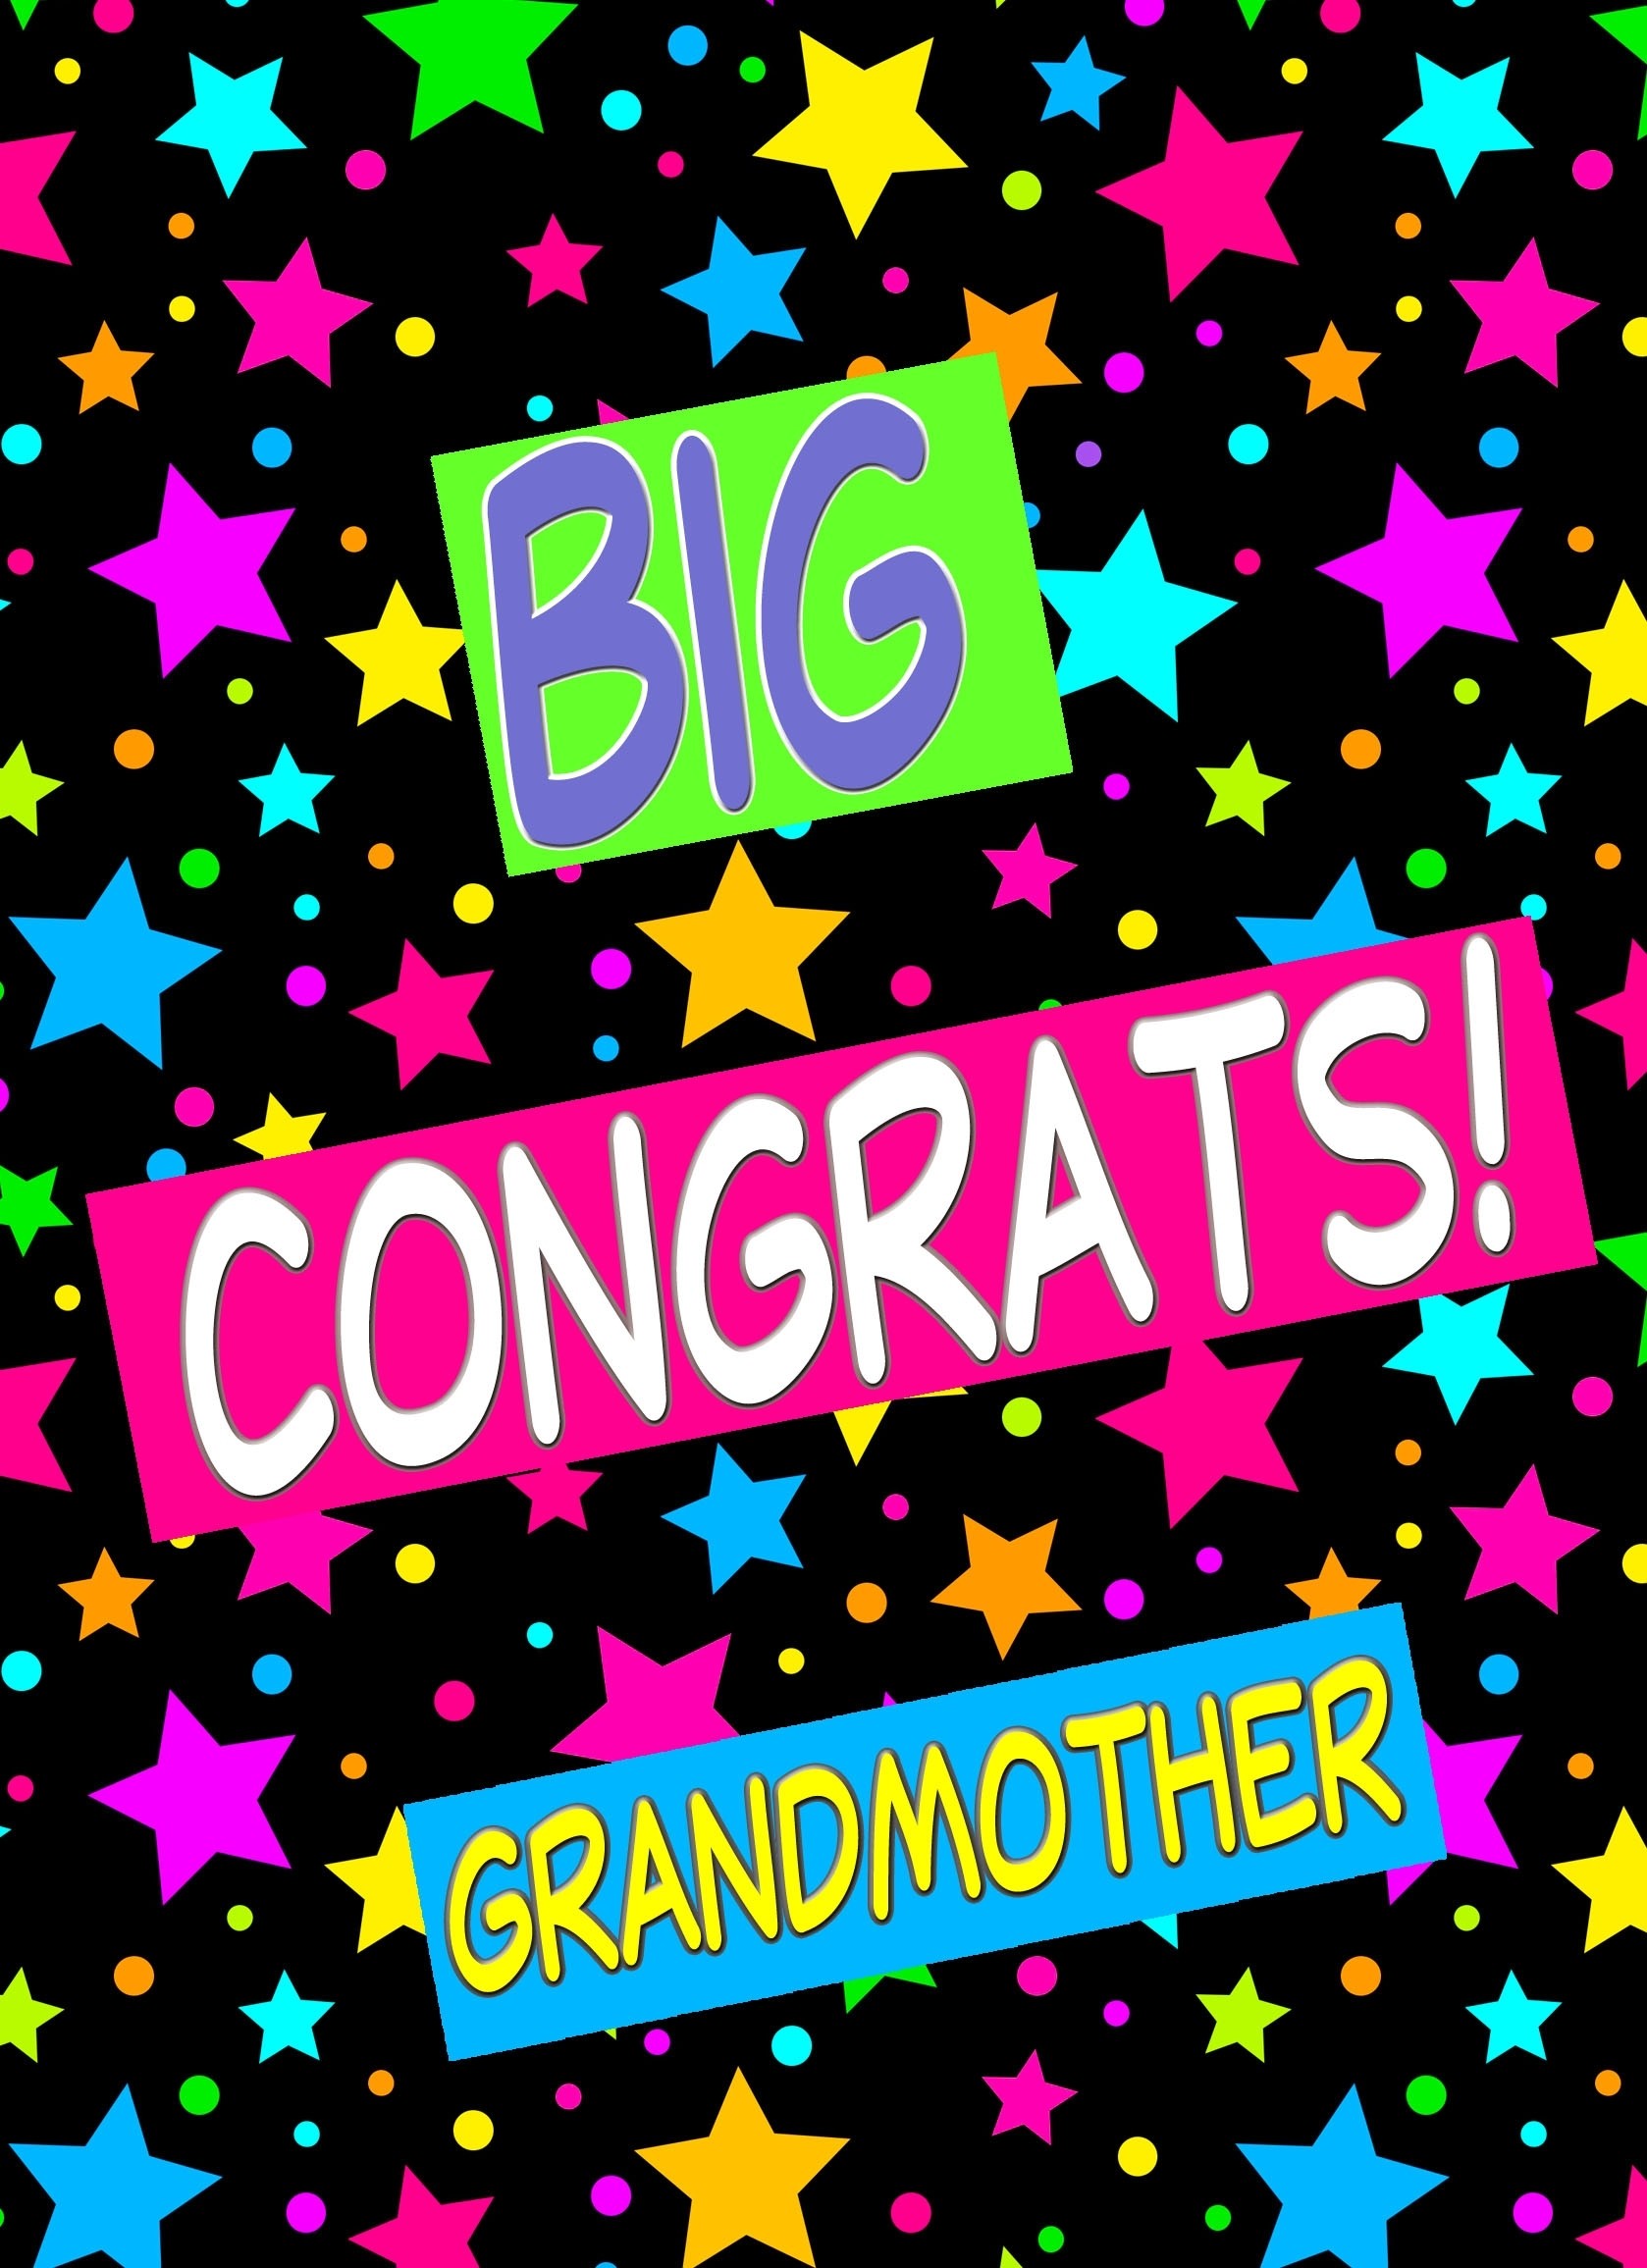 Congratulations Card For Grandmother (Stars)